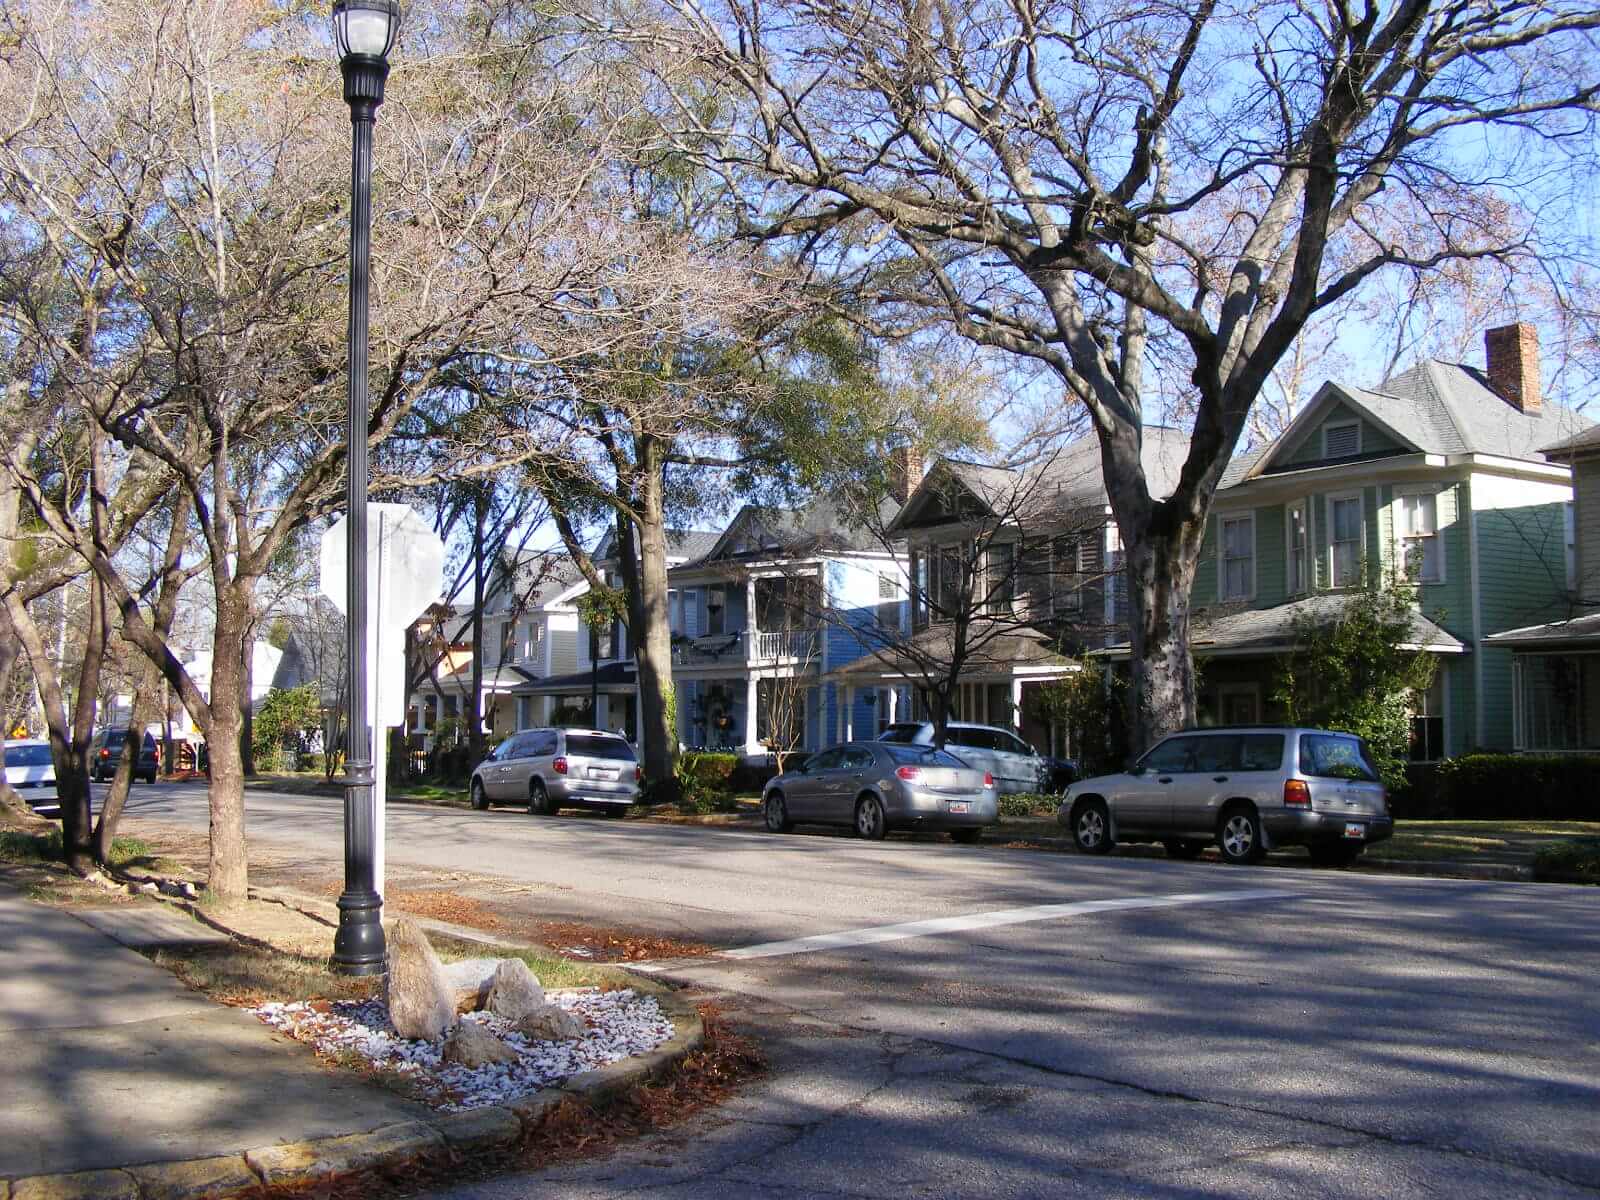 Photograph of a street with two story wood-sided homes